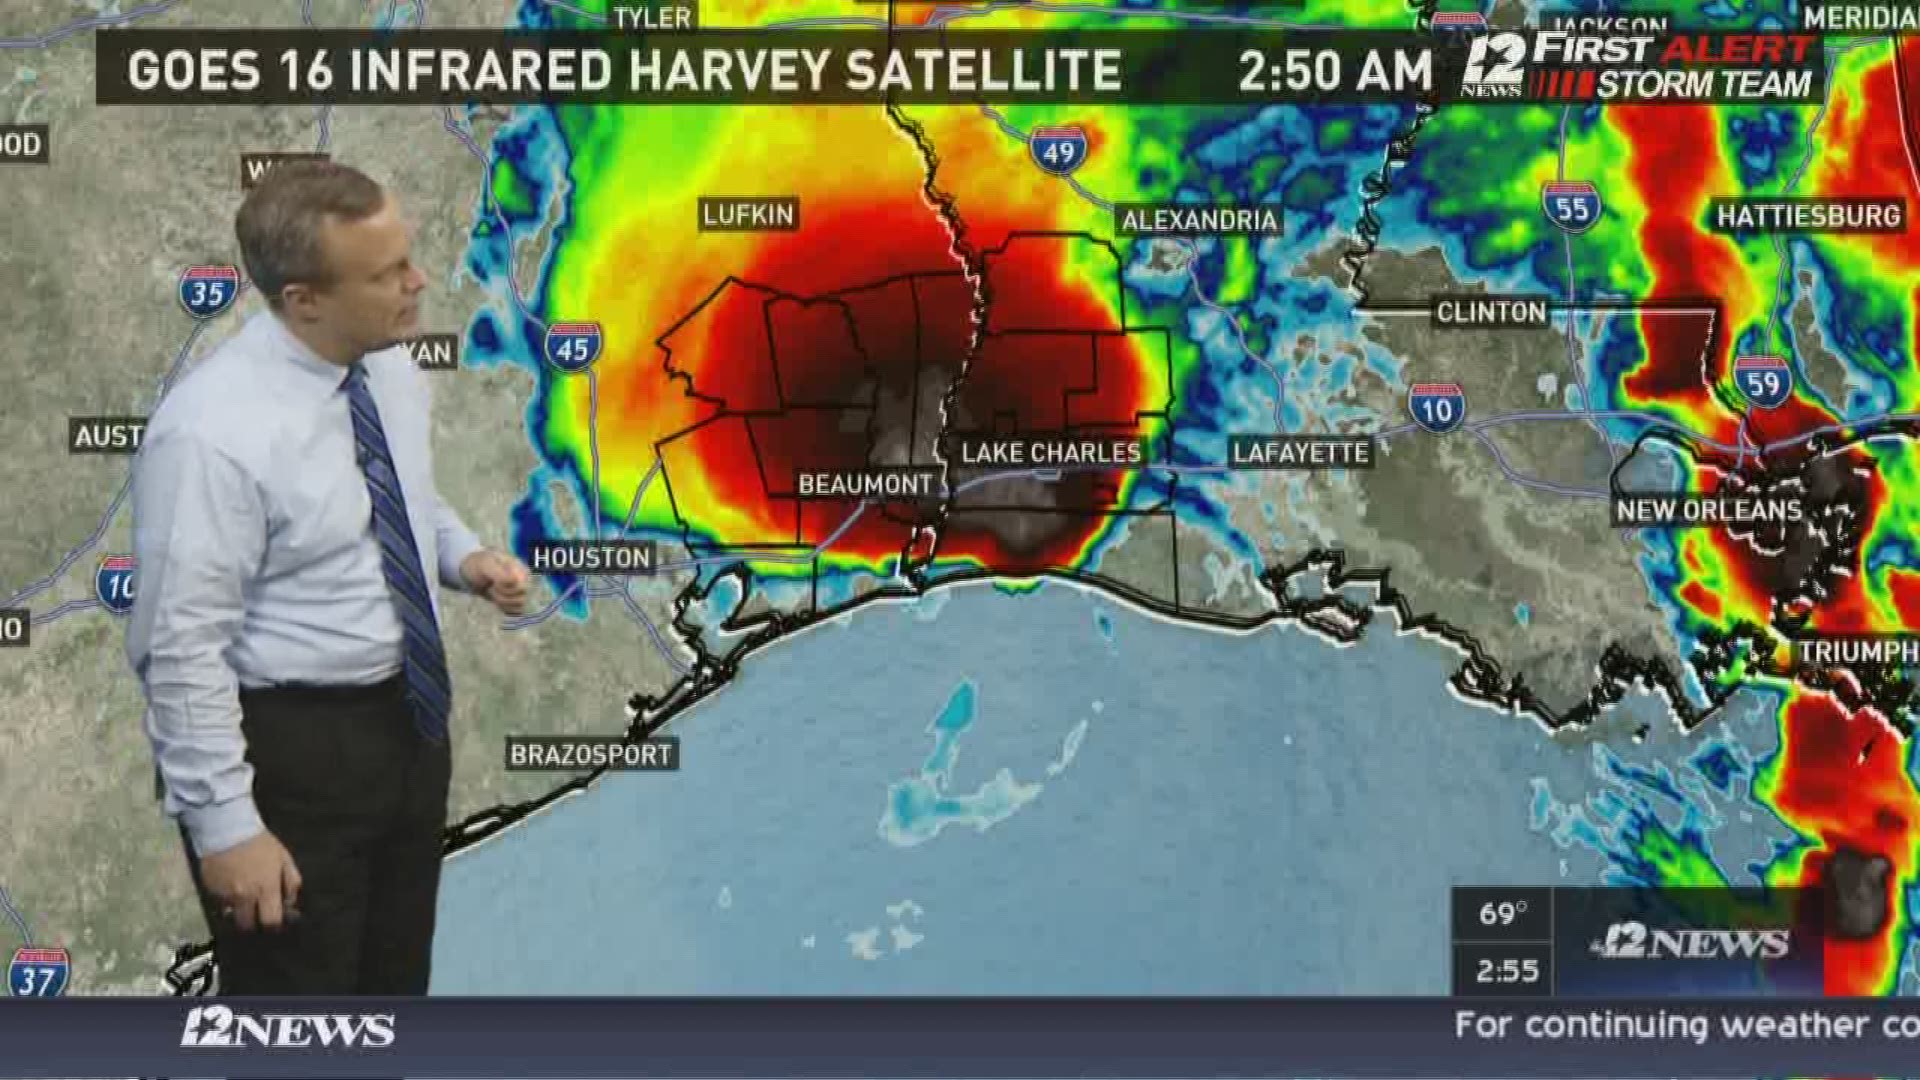 As Tropical Storm Harvey makes landfall once again, there's flash floods causing problems in Southeast Texas. (8/30 3 a.m.) 